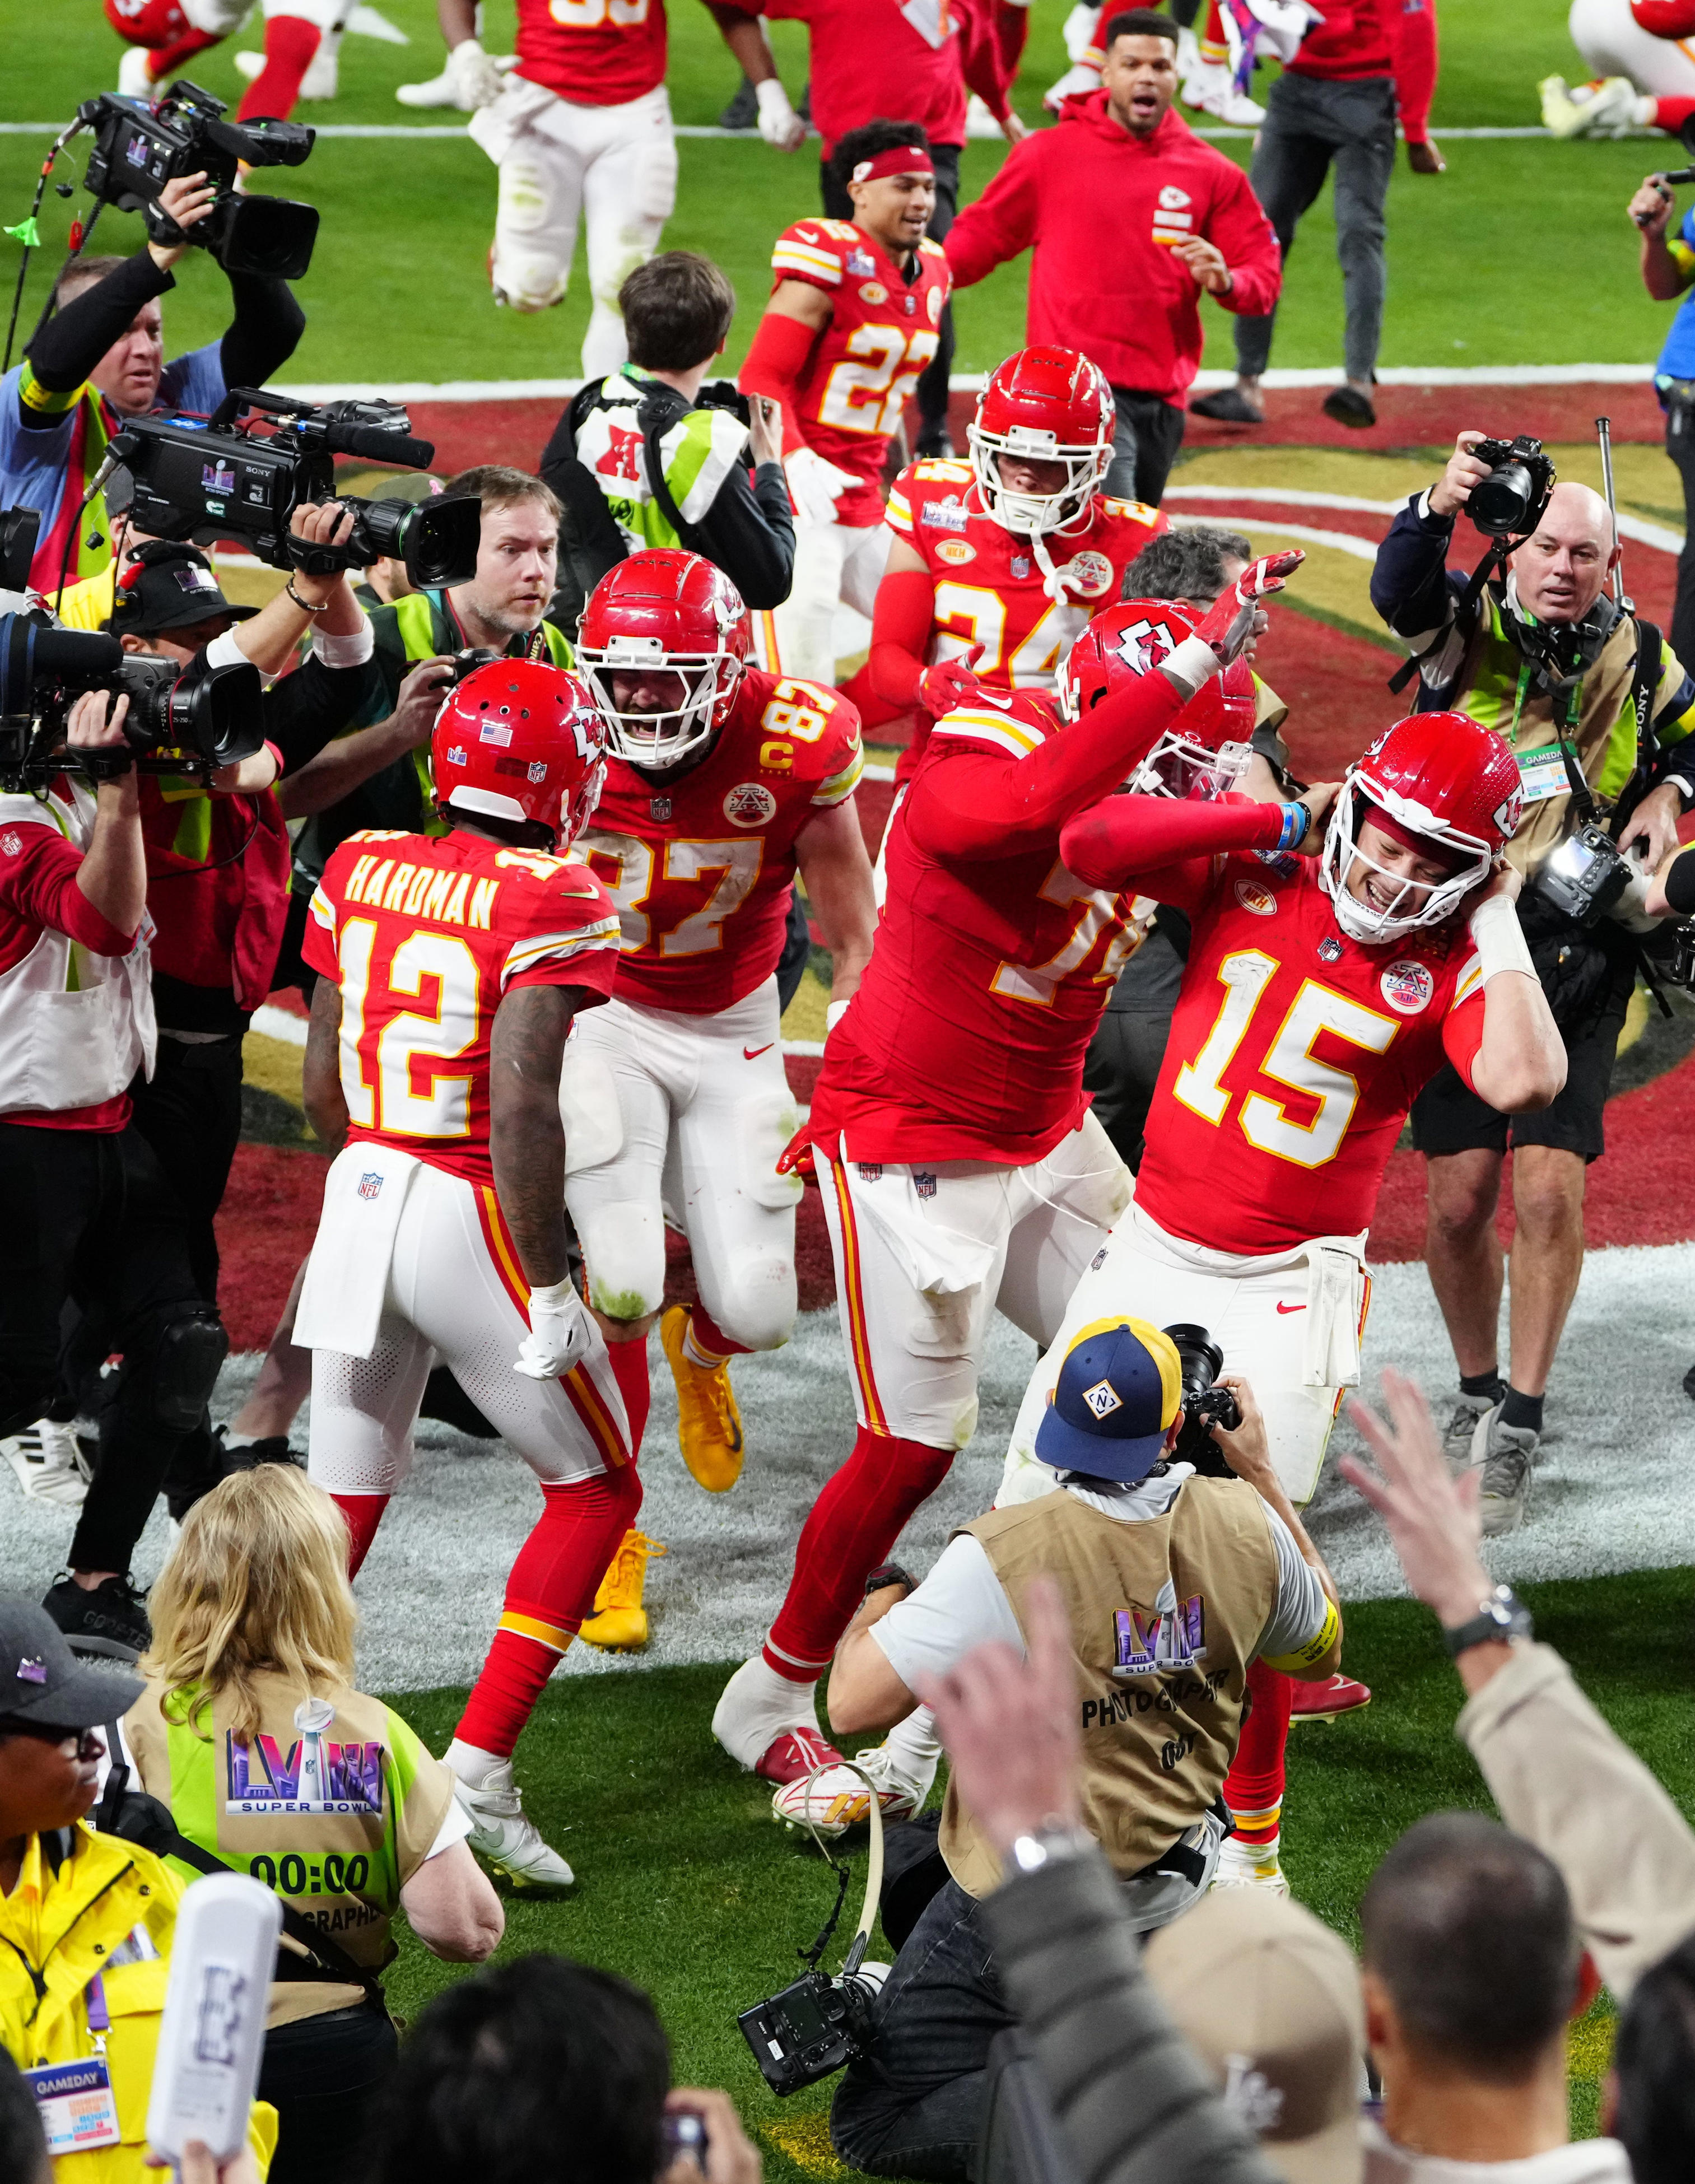 super bowl 2024 recap: chiefs top 49ers in ot to repeat as champions. see the highlights